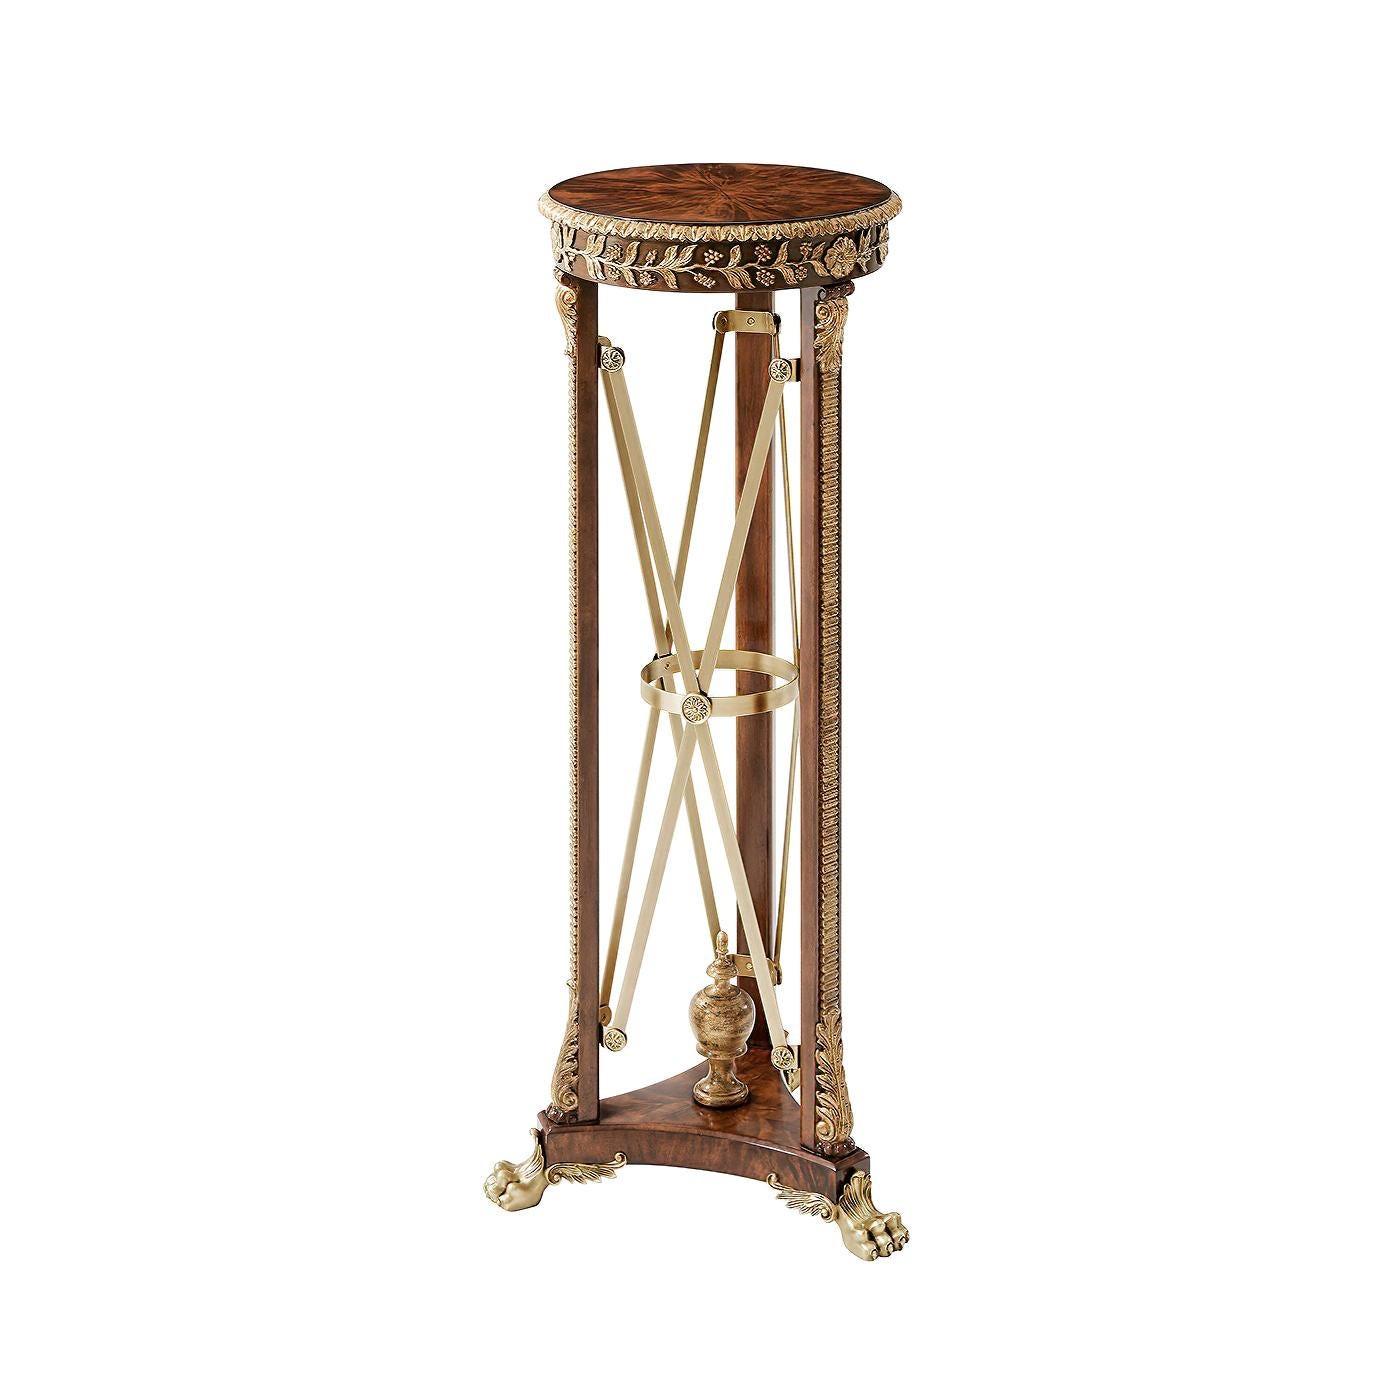 A fine pair of Regency style pedestals or carved and gilt torchères, the circular top with a carved edge and frieze, on three supports with acanthus bases and capitals, the whole supported on a trefoil concave base and raised on brass winged lions